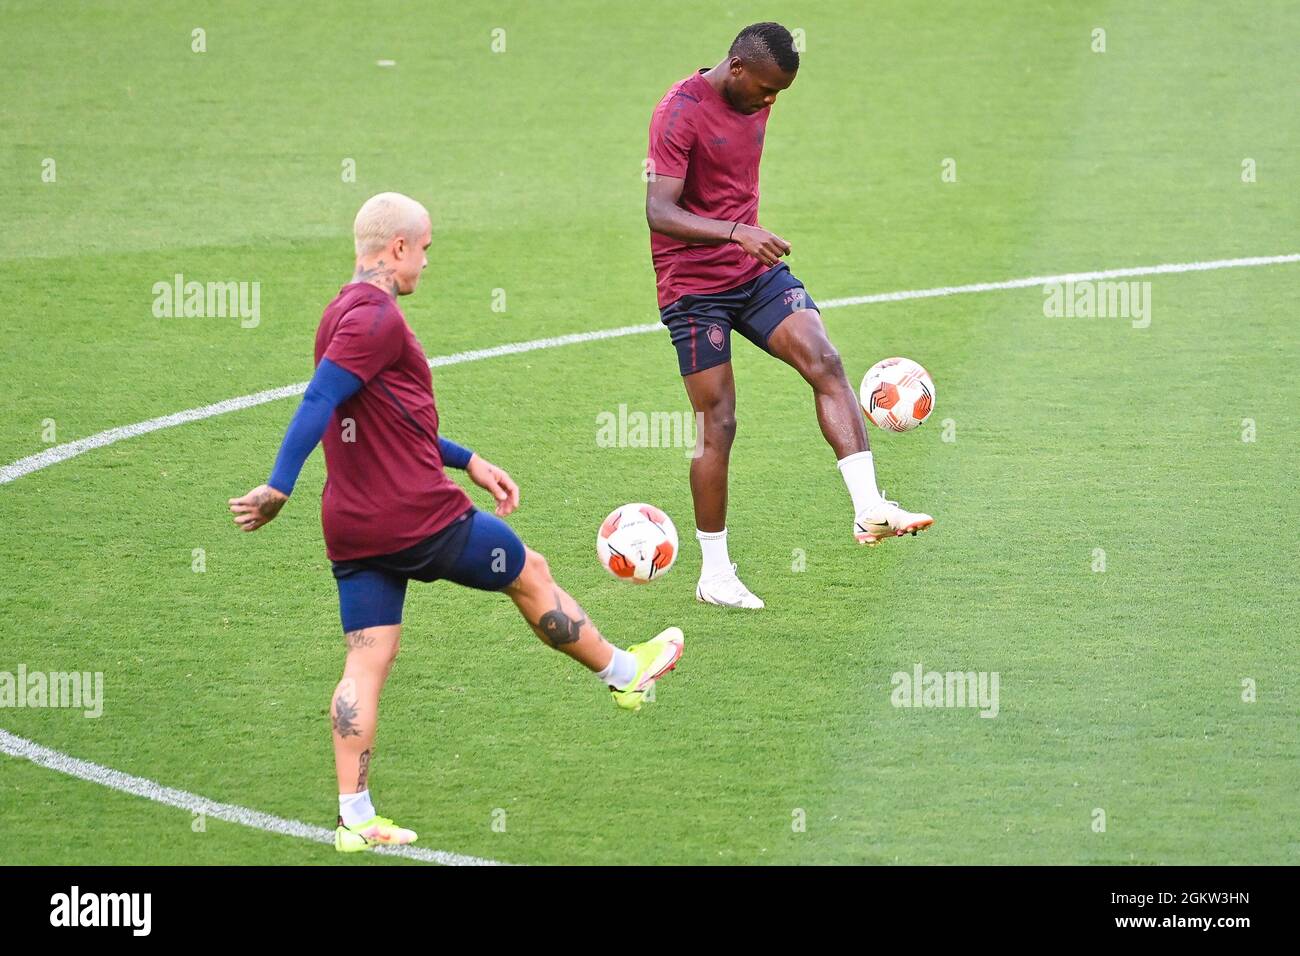 Antwerp's Ally Samata Mbwana and Antwerp's Radja Nainggolan pictured in action during a training session of Belgian soccer team Royal Antwerp FC, Wedn Stock Photo